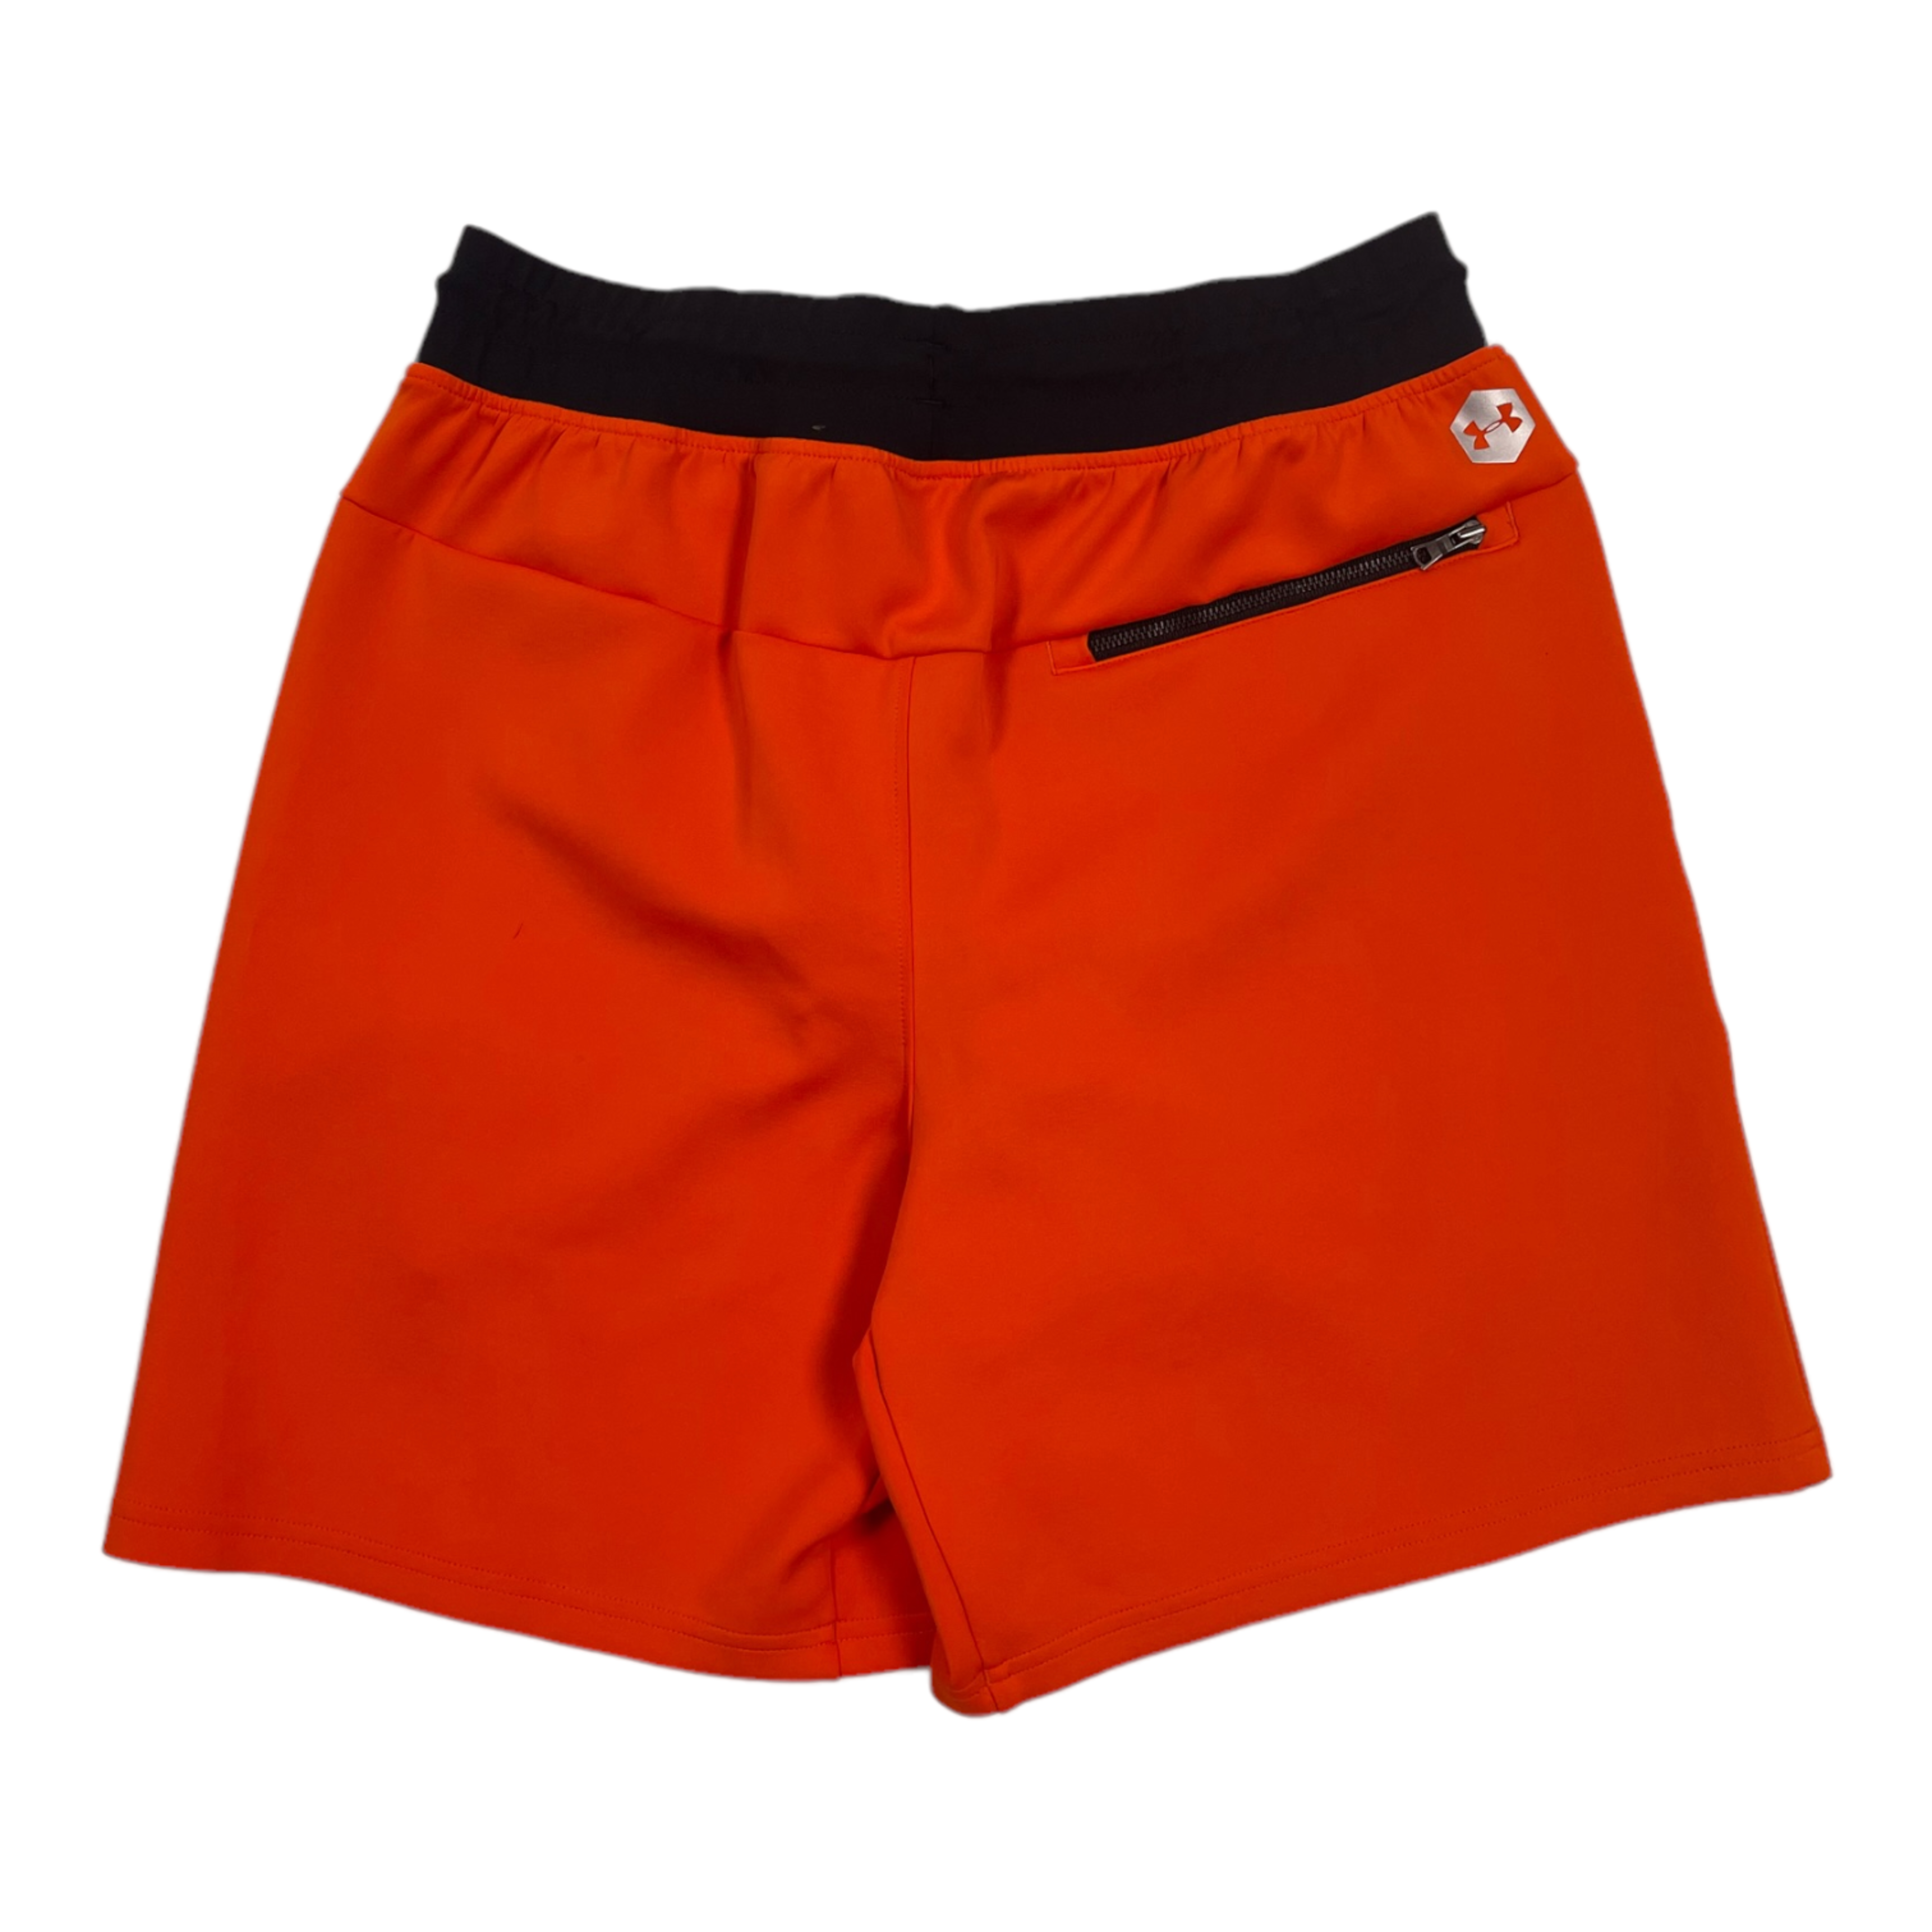 Alternate View 1 of Palm Angels X Under Armour Track Shorts Orange Pre-Owned